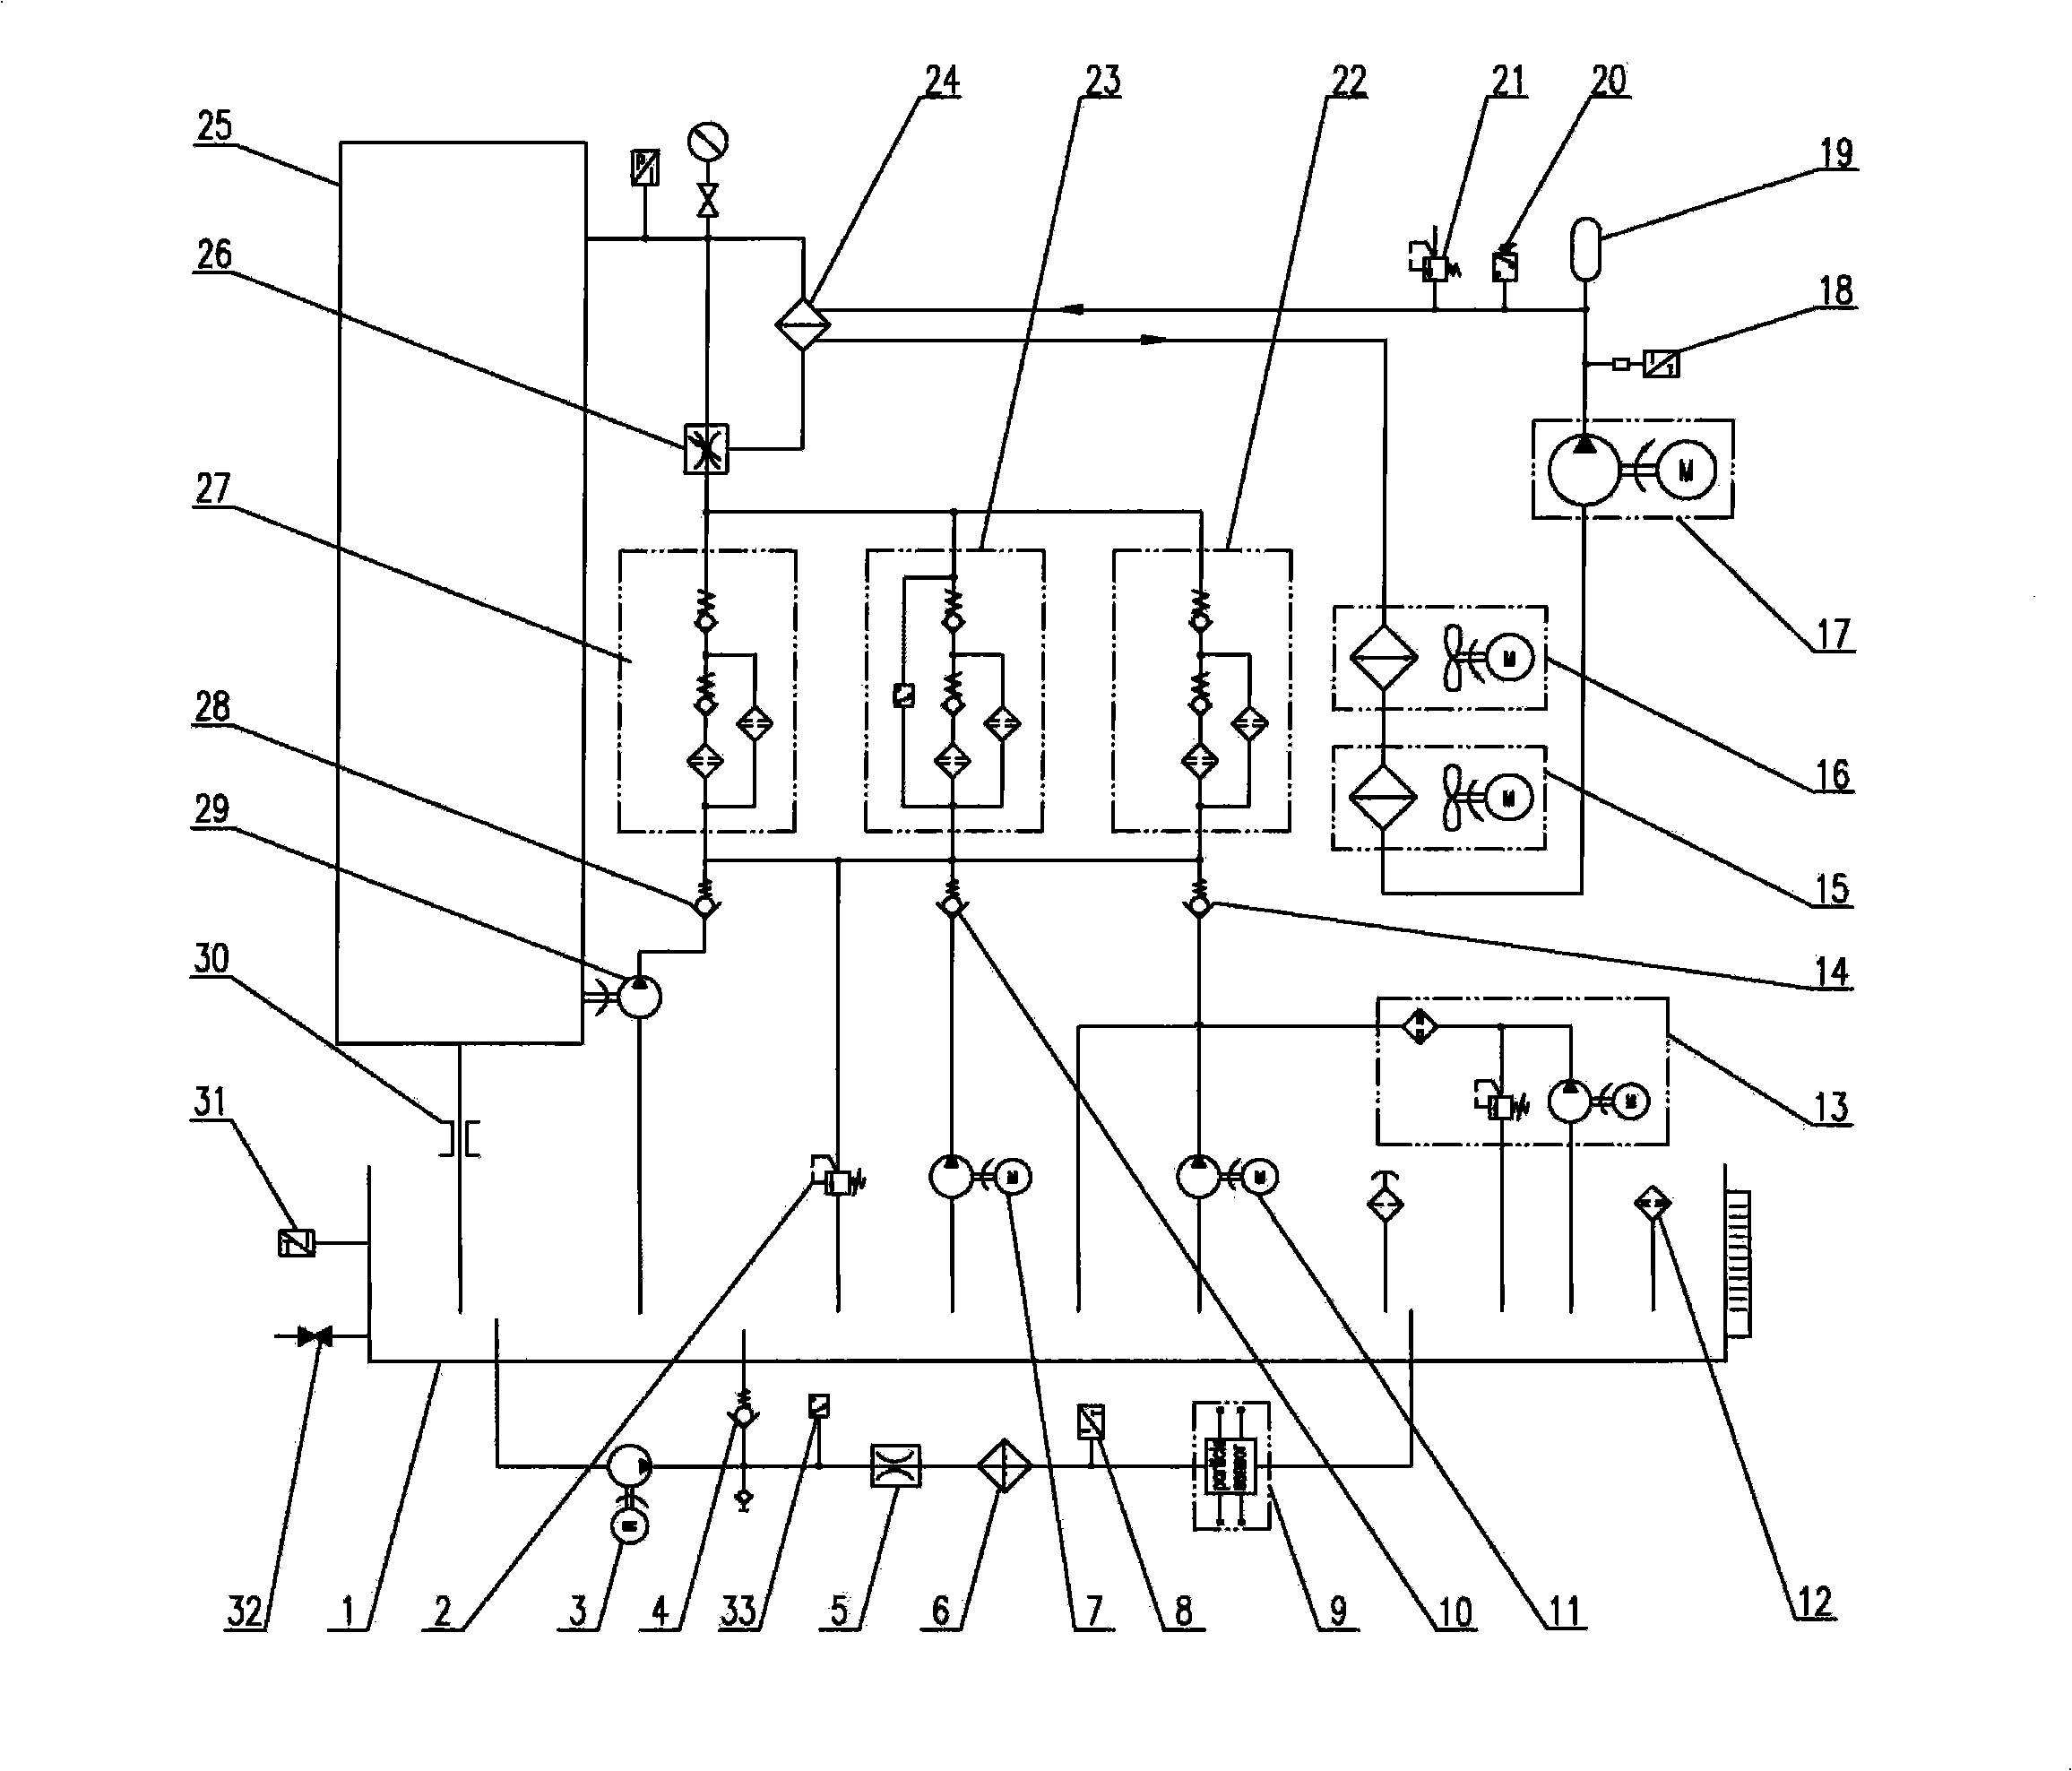 Lubricating system for gear box of wind generating set